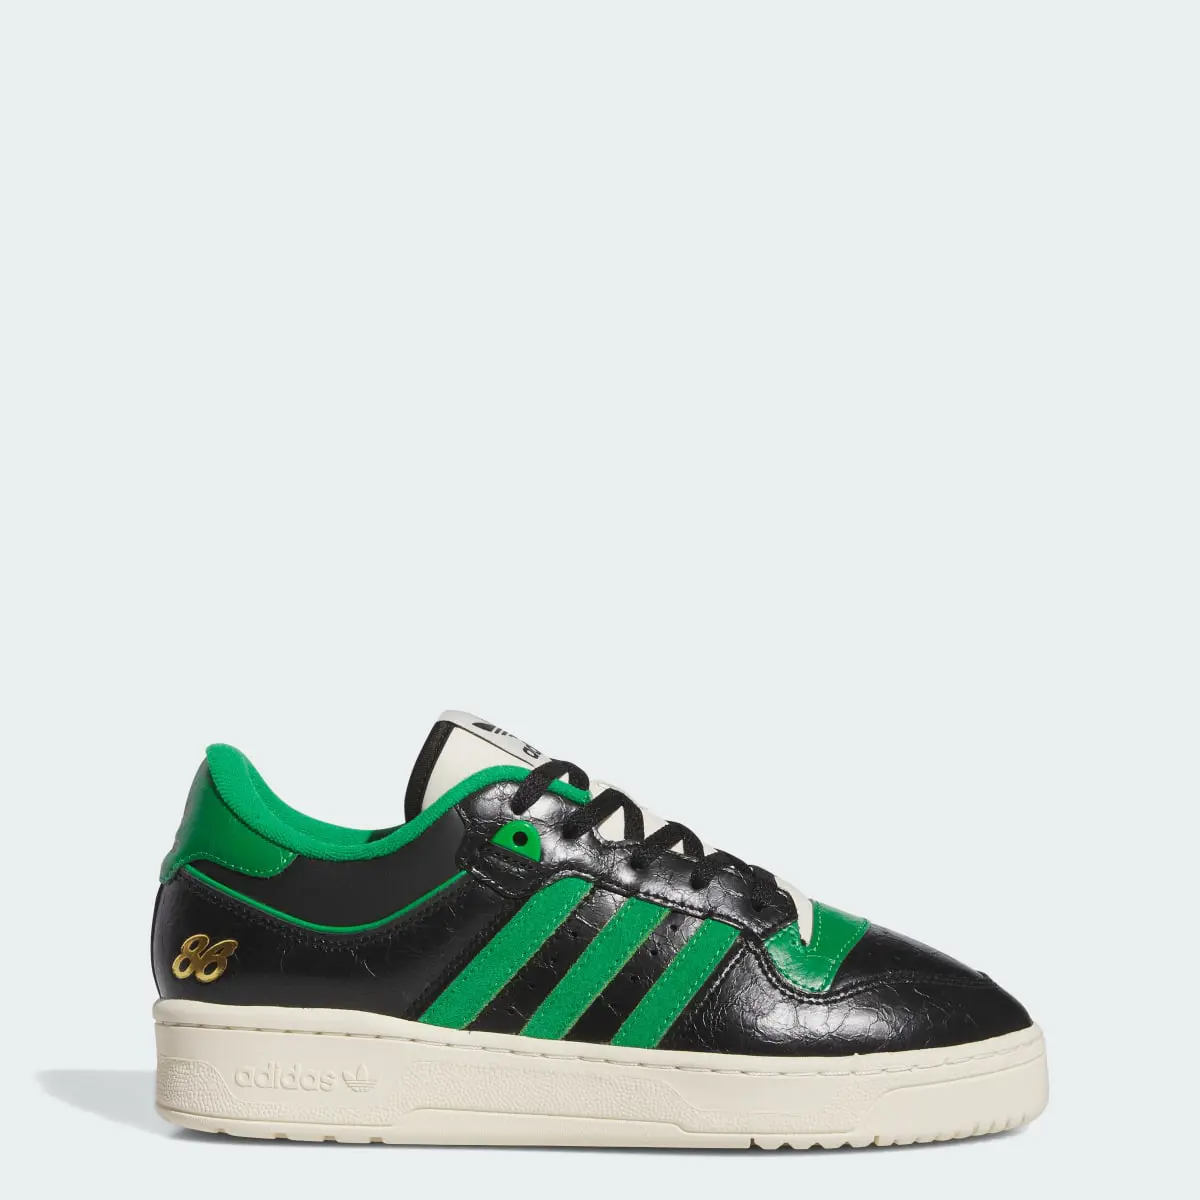 Adidas Rivalry 86 Low Schuh. 1